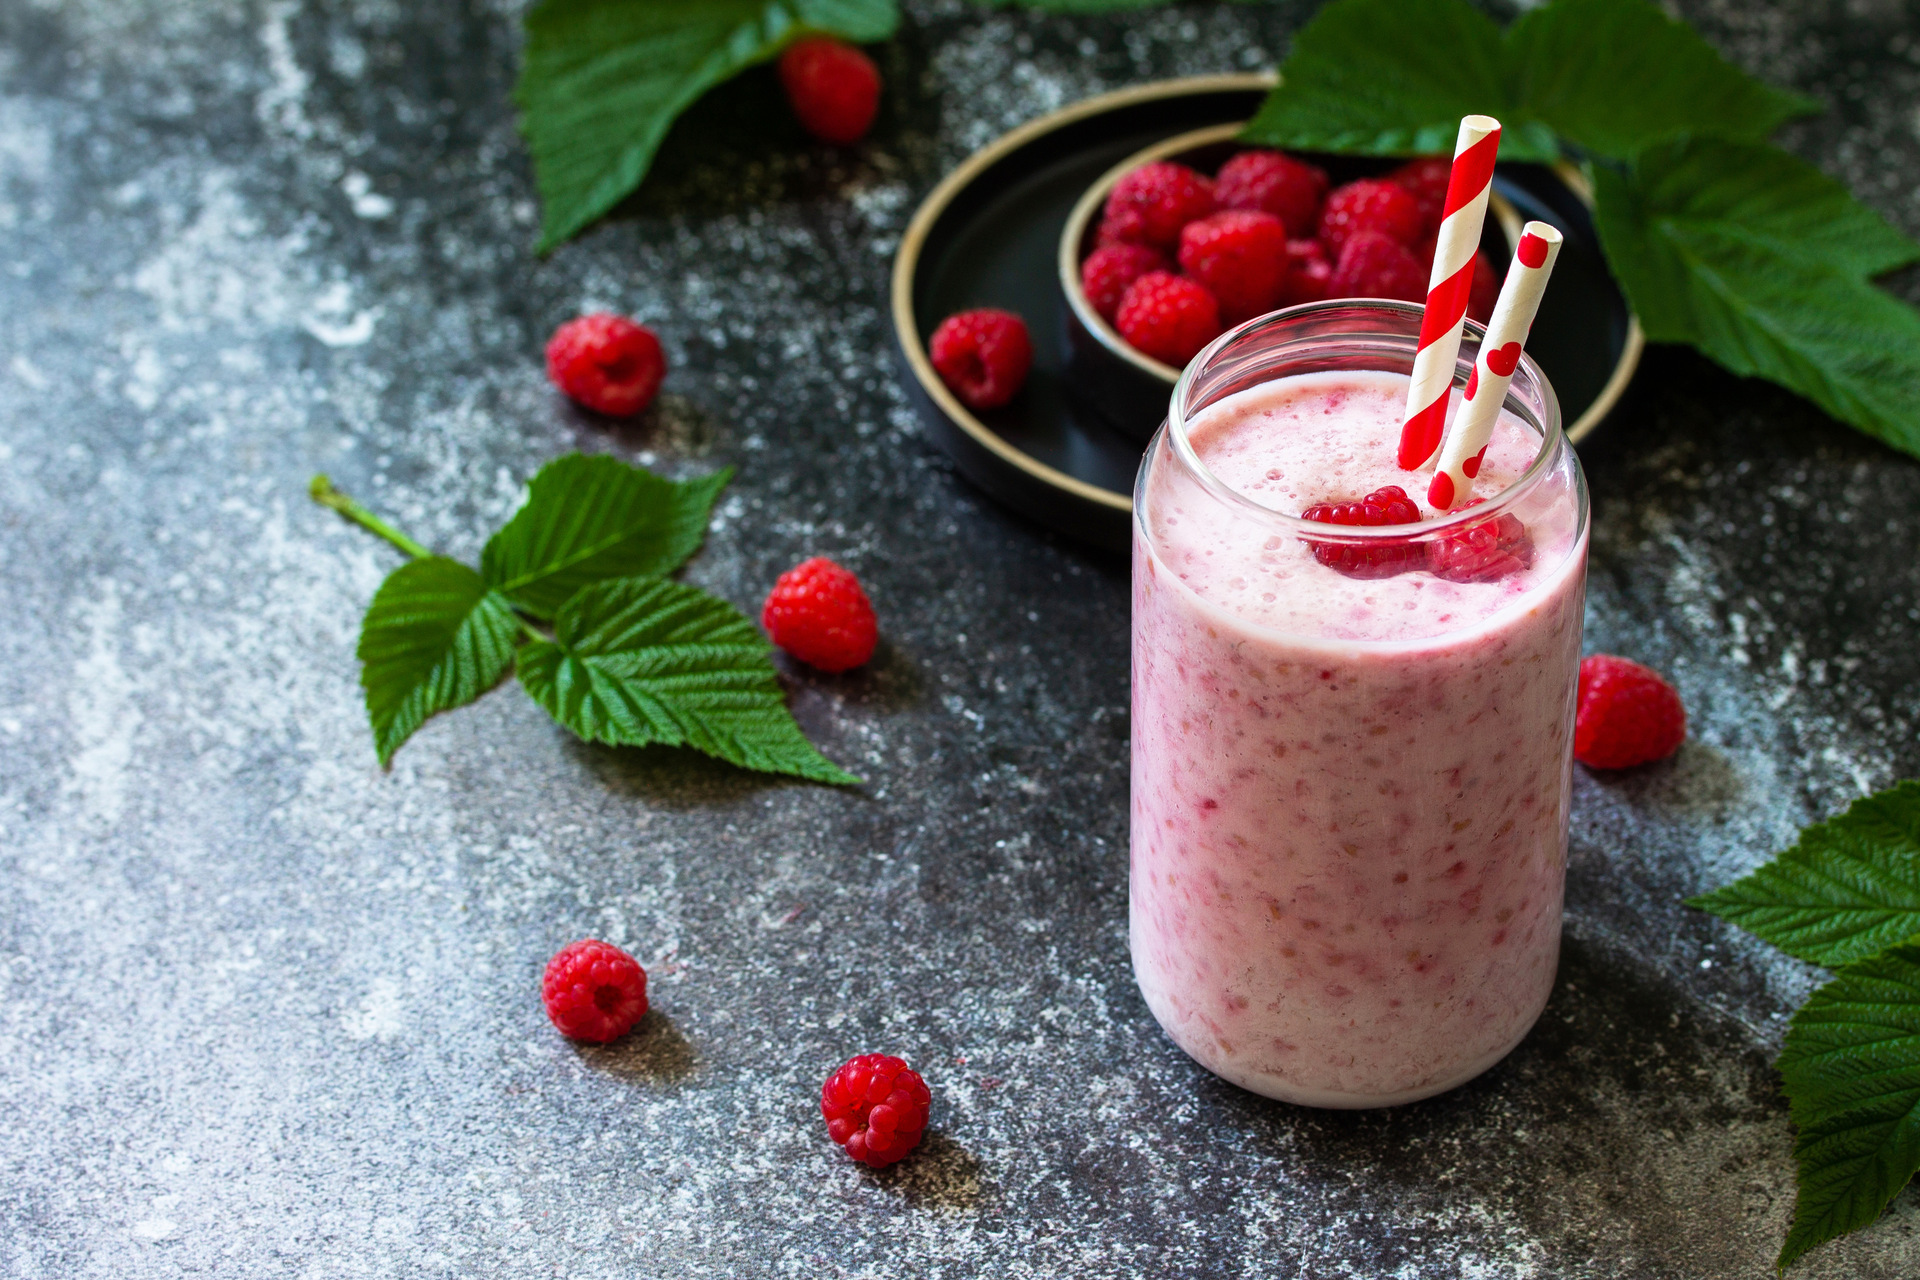 Raspberry Kale Smoothie for Losing Weight